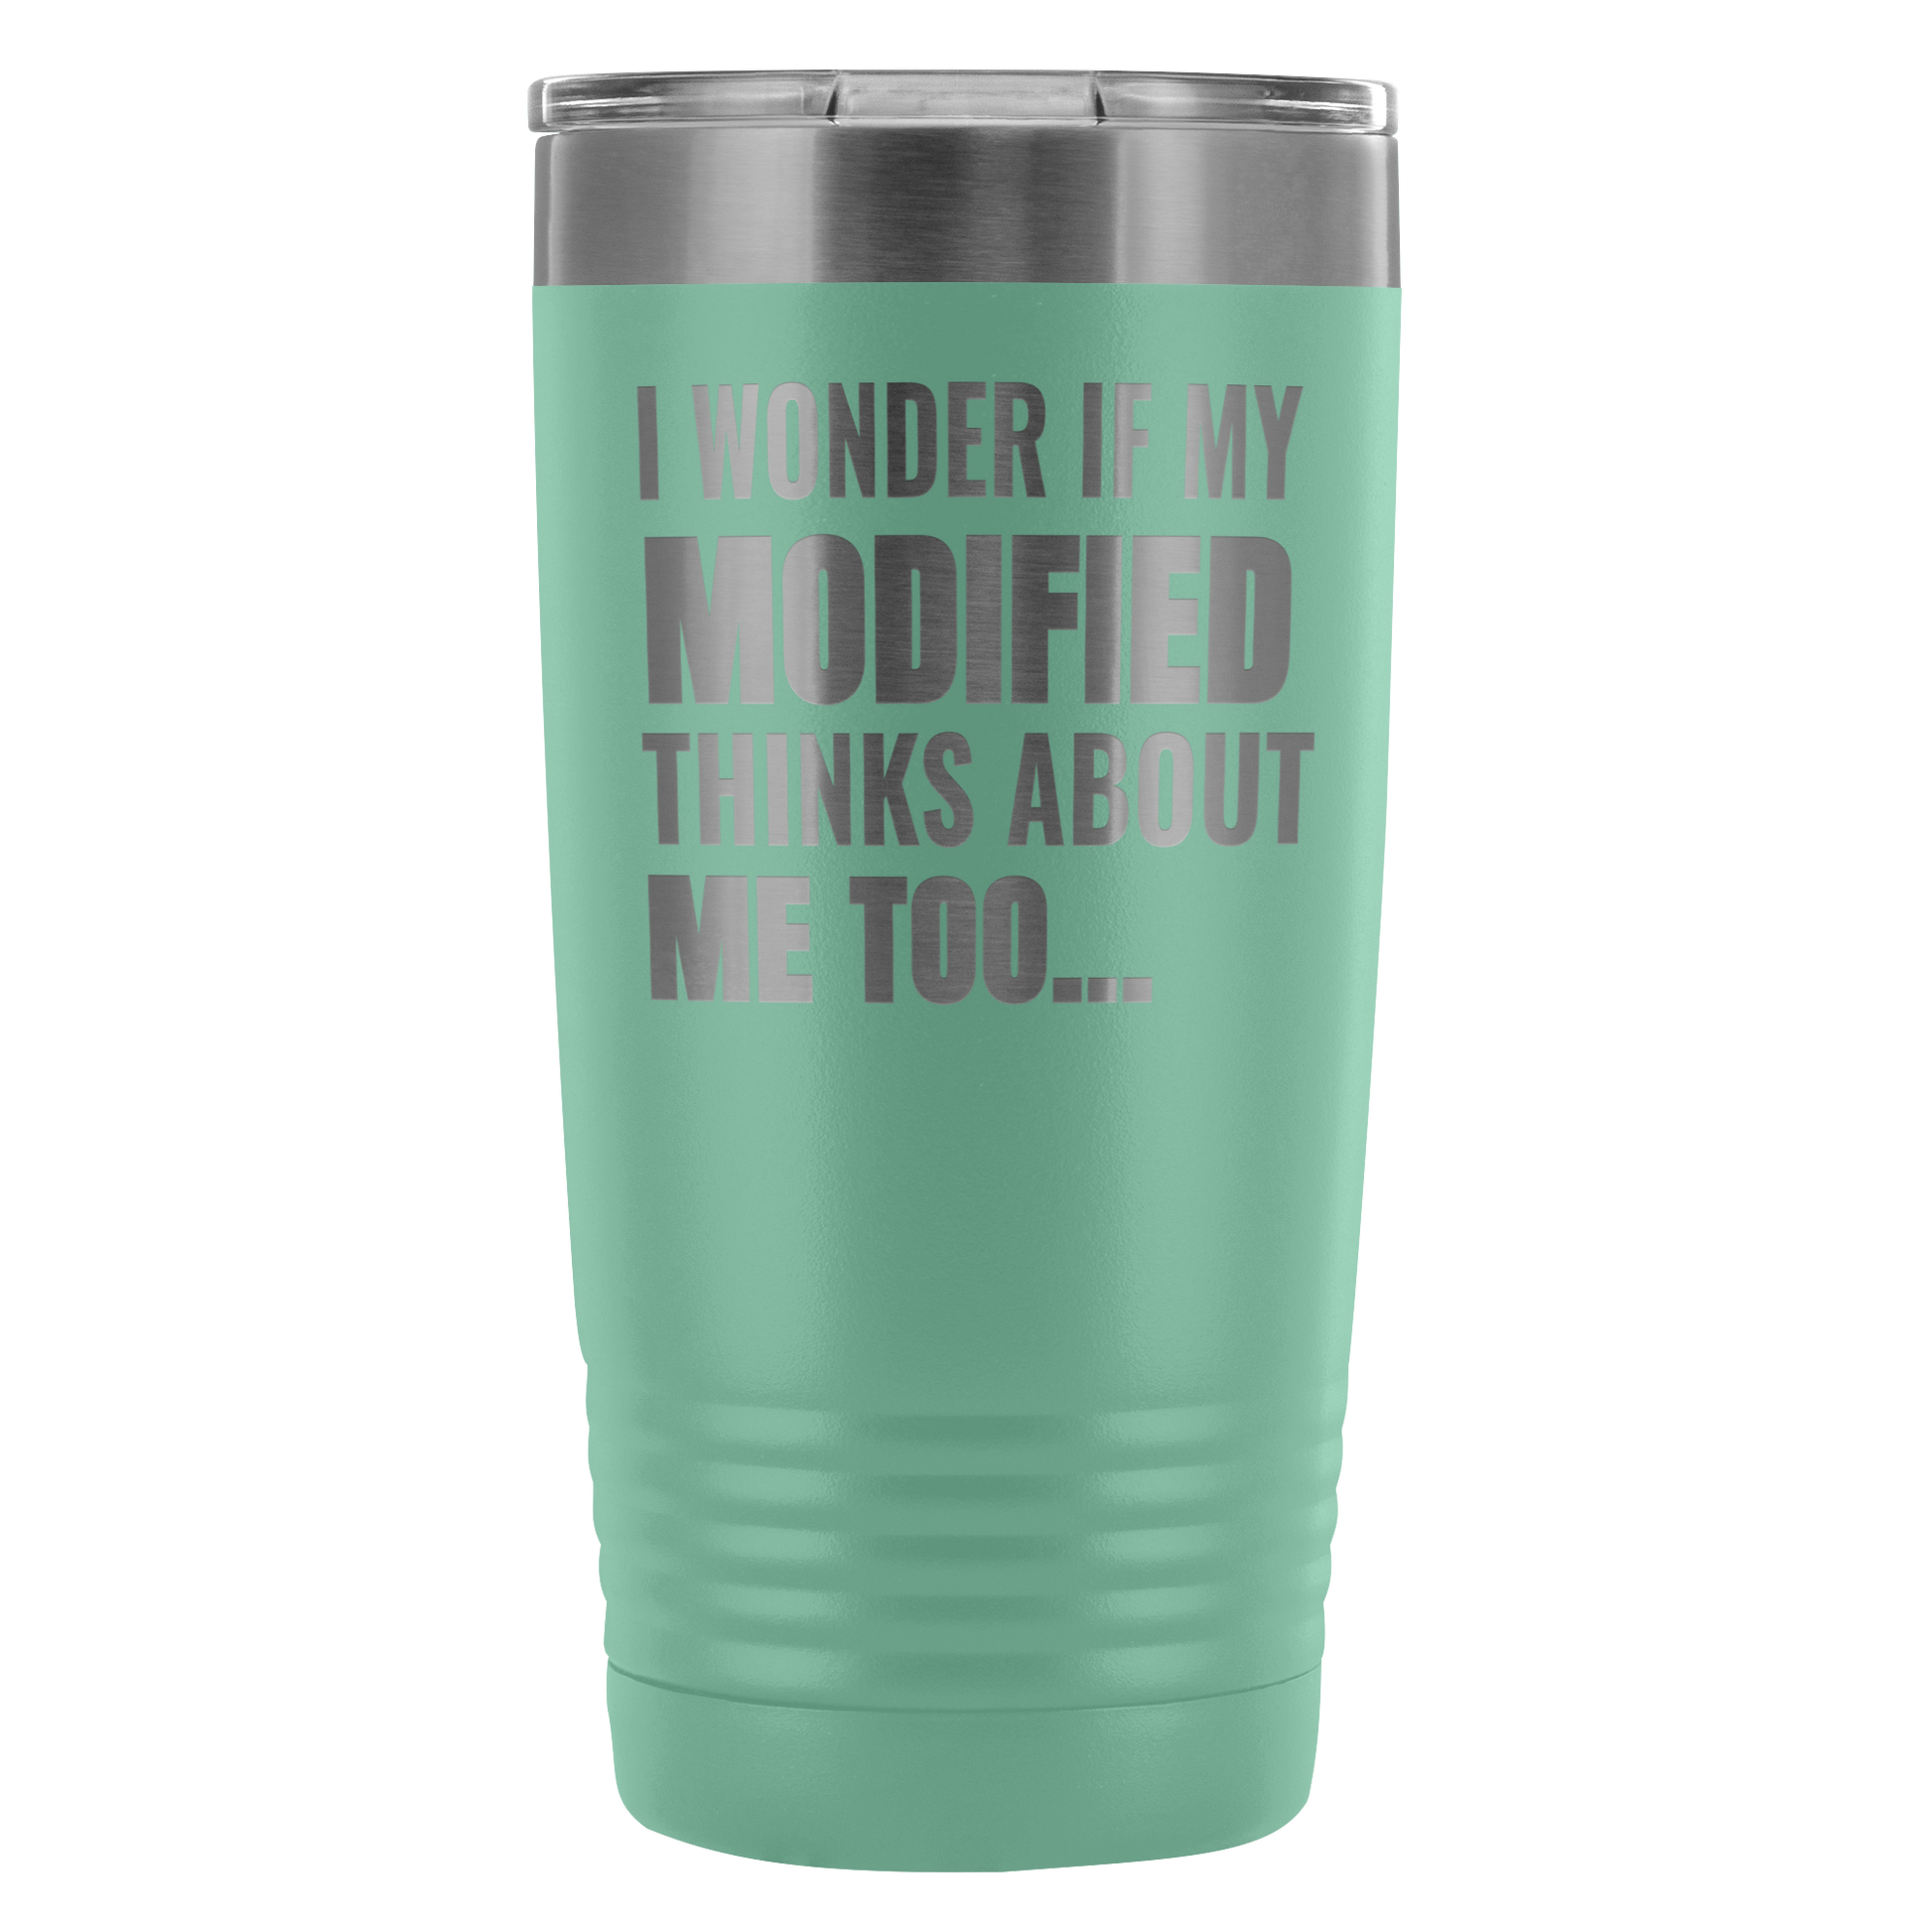 I Wonder If My Modified Thinks About Me Too 20 Oz Travel Tumbler - Turn Left T-Shirts Racewear